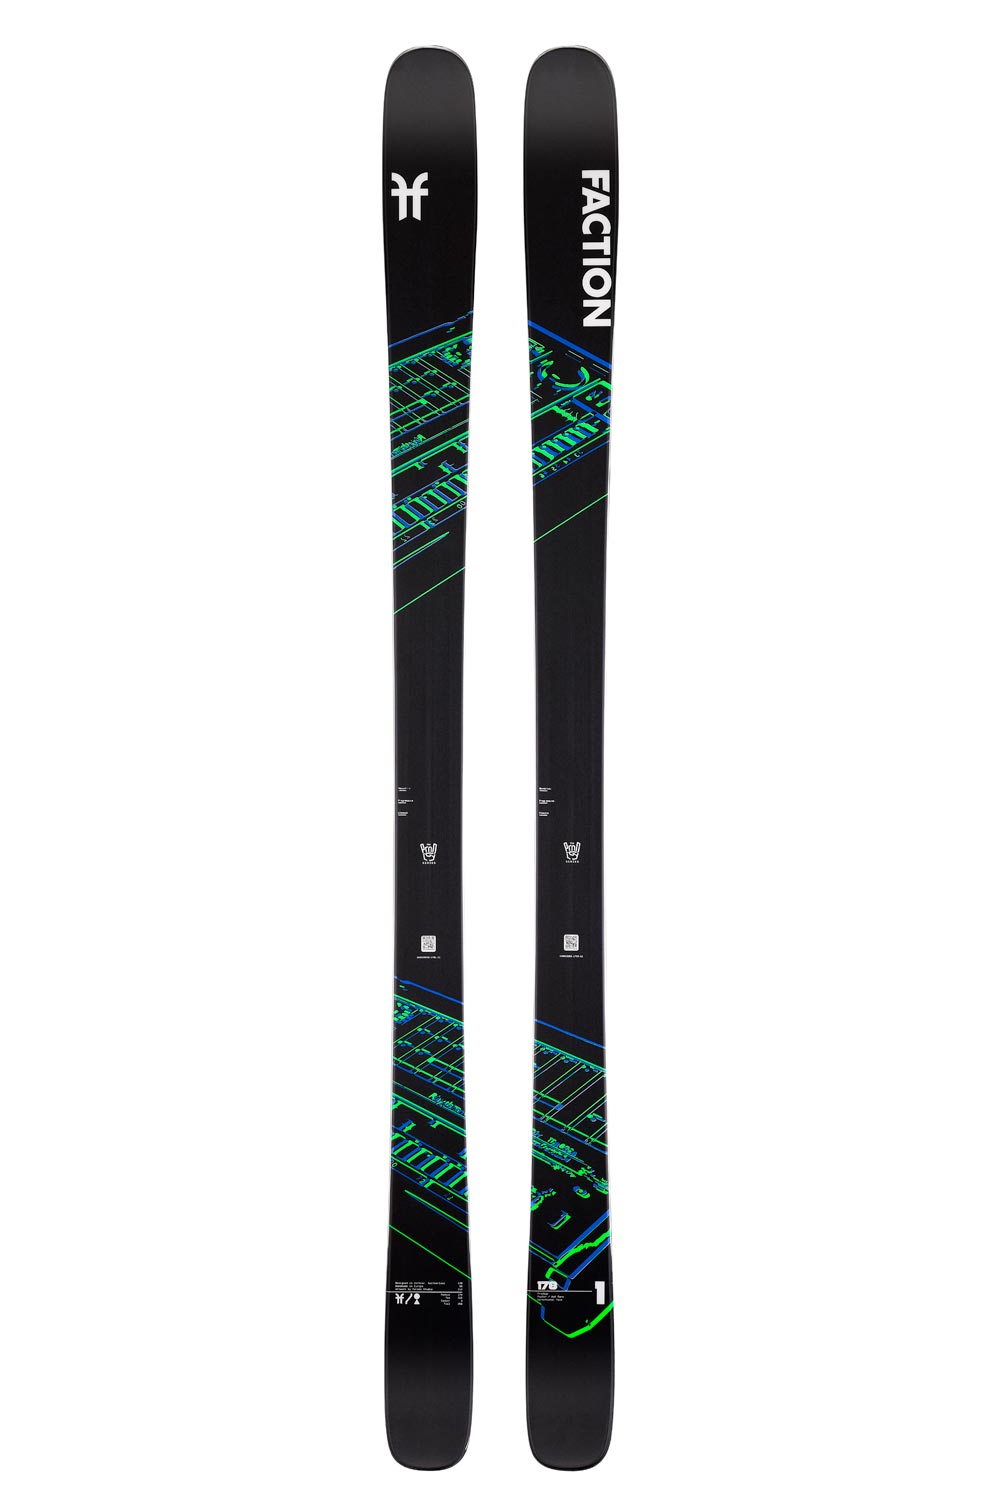 Faction Prodigy 1 skis, black with neon green accents